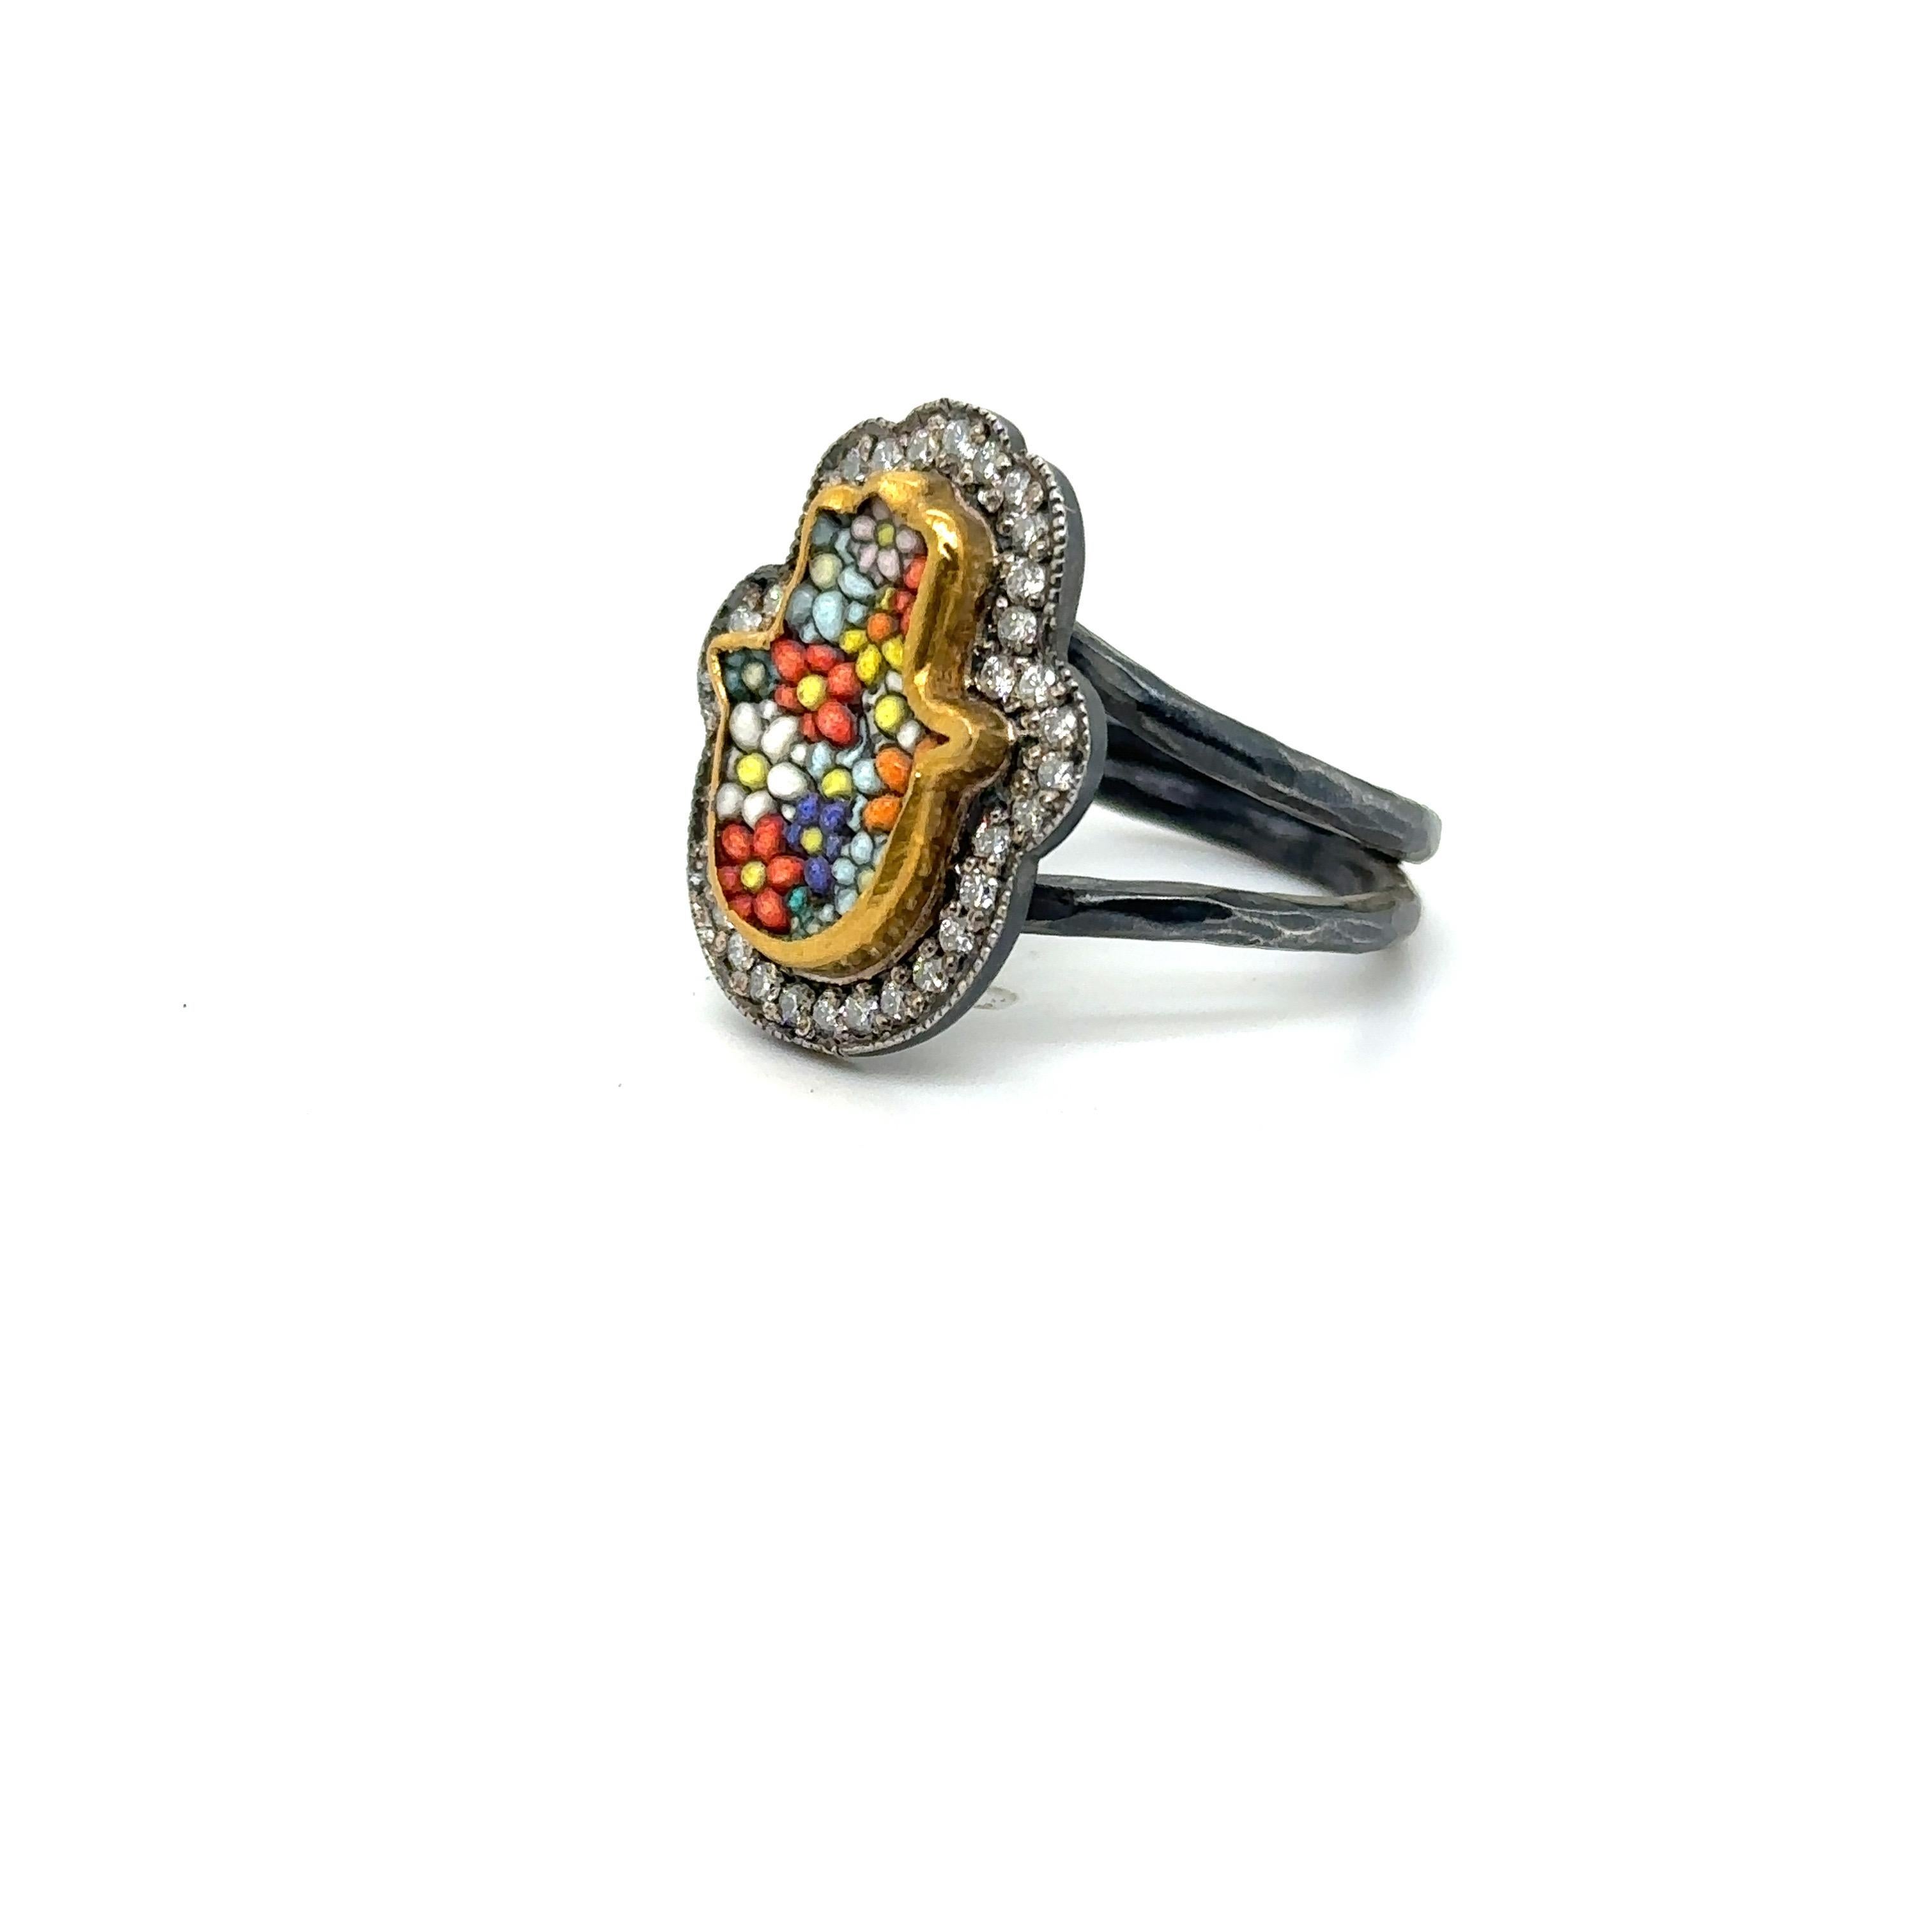 JAS-22-2293 - 24KT GOLD/SS MICRO MOSAIC RING with 0.45 CT DIAMONDS In New Condition For Sale In New York, NY